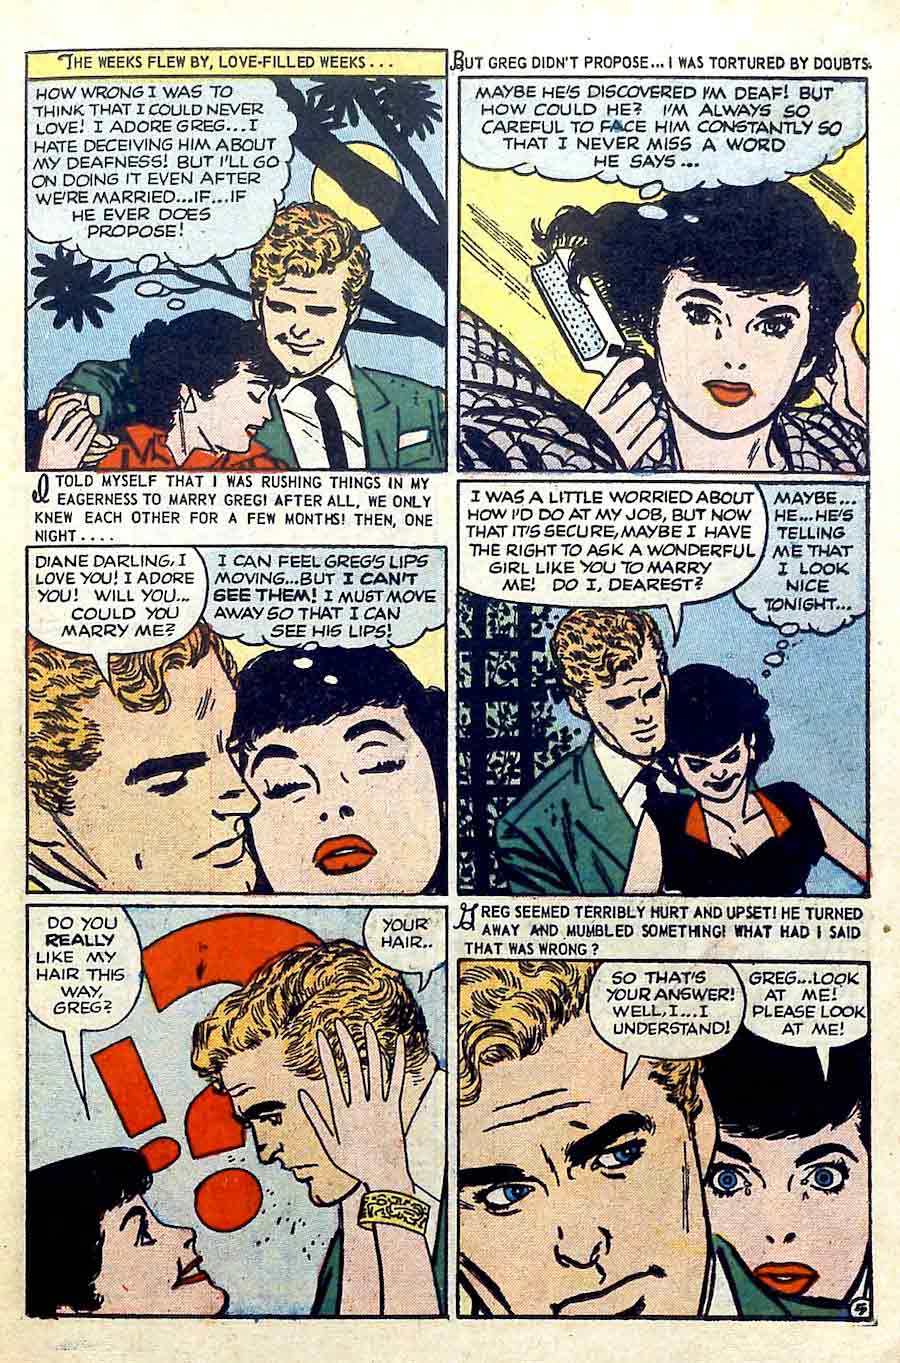 Boy Loves Girl #46 golden age 1950s romance comic book page art by Alex Toth